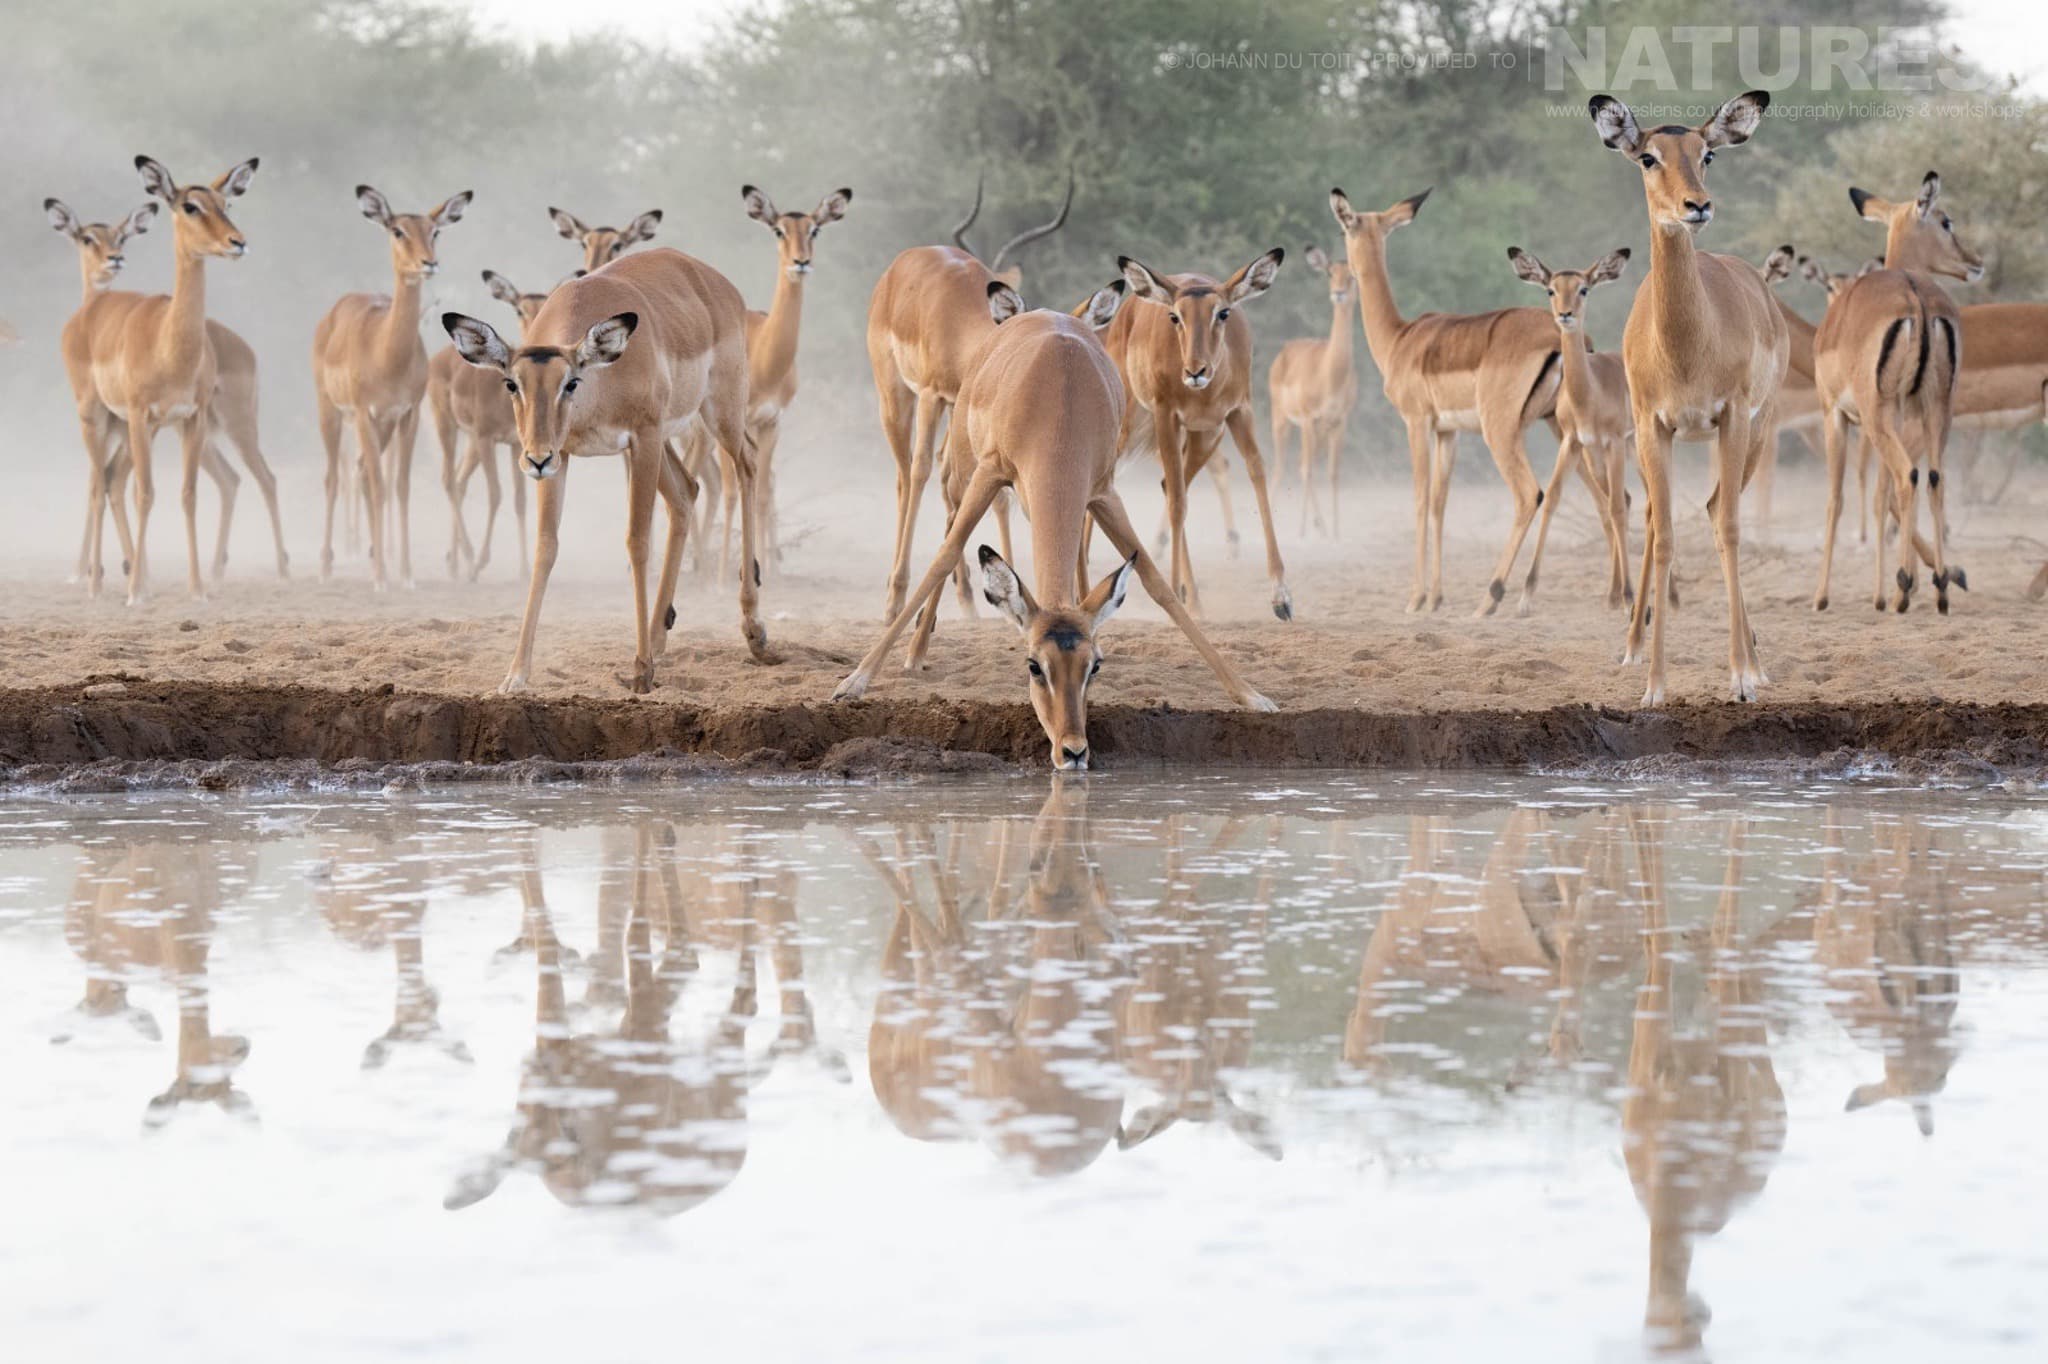 An Image Typical Of Those Captured At The Camp Used For The NaturesLens African Wildlife of the Great Rift Valley Photography Holiday